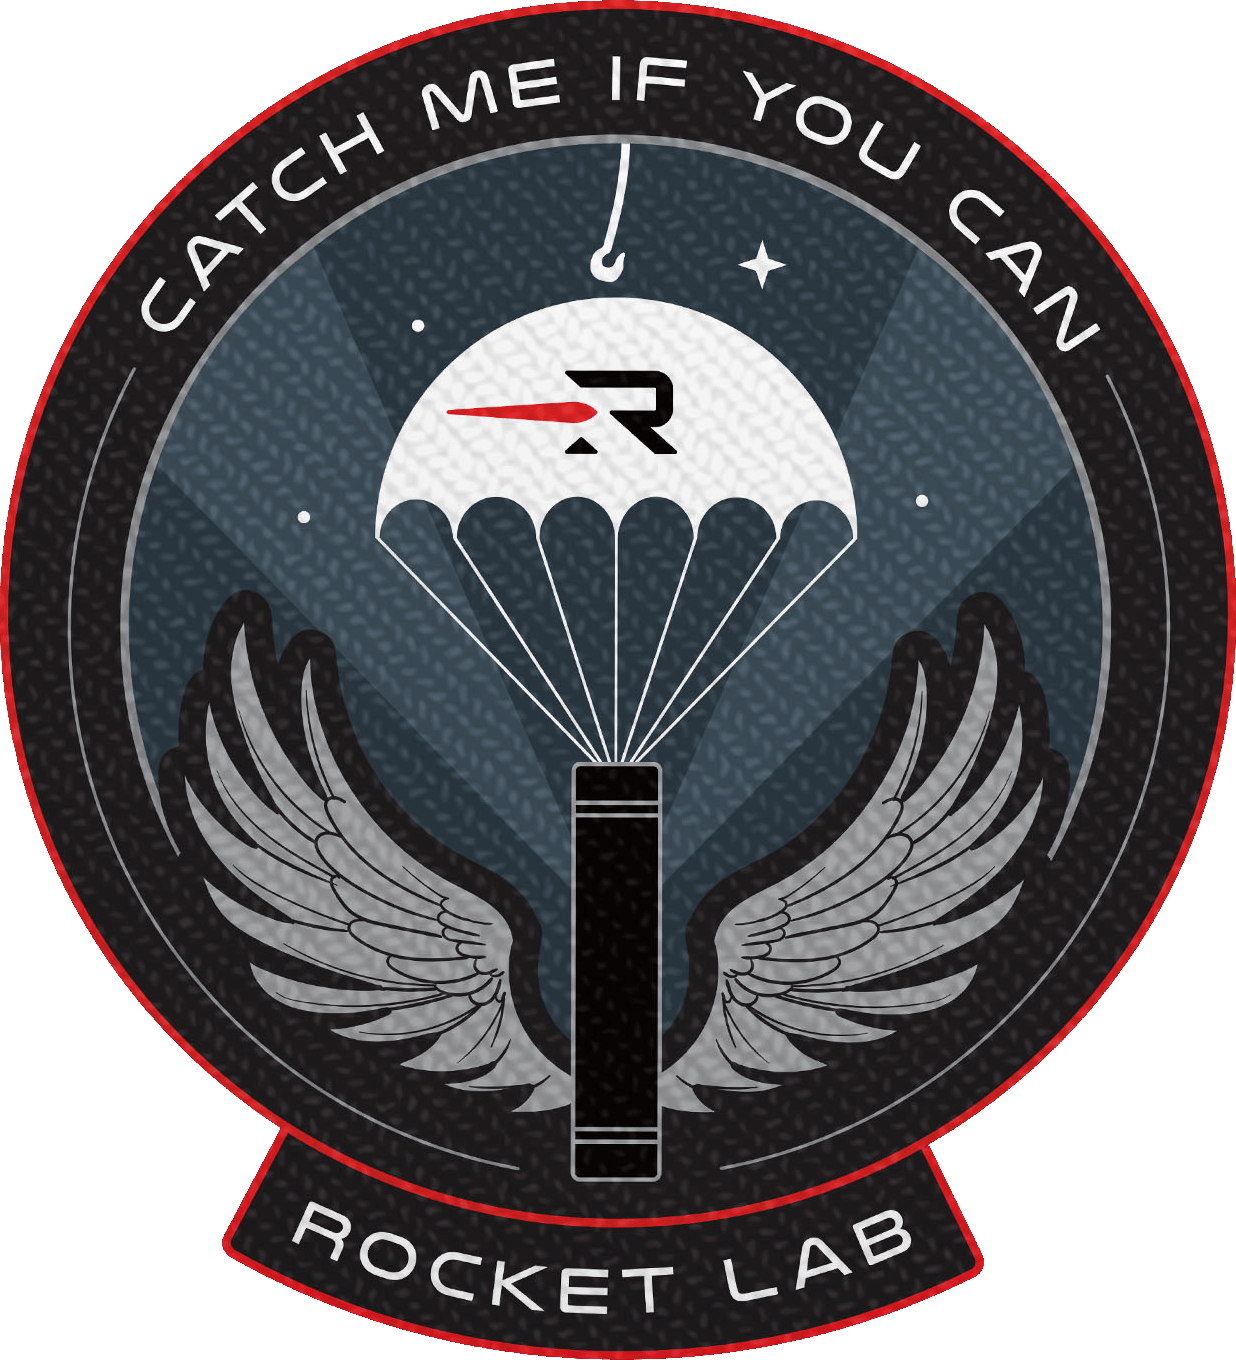 Mission patch for Catch Me If You Can